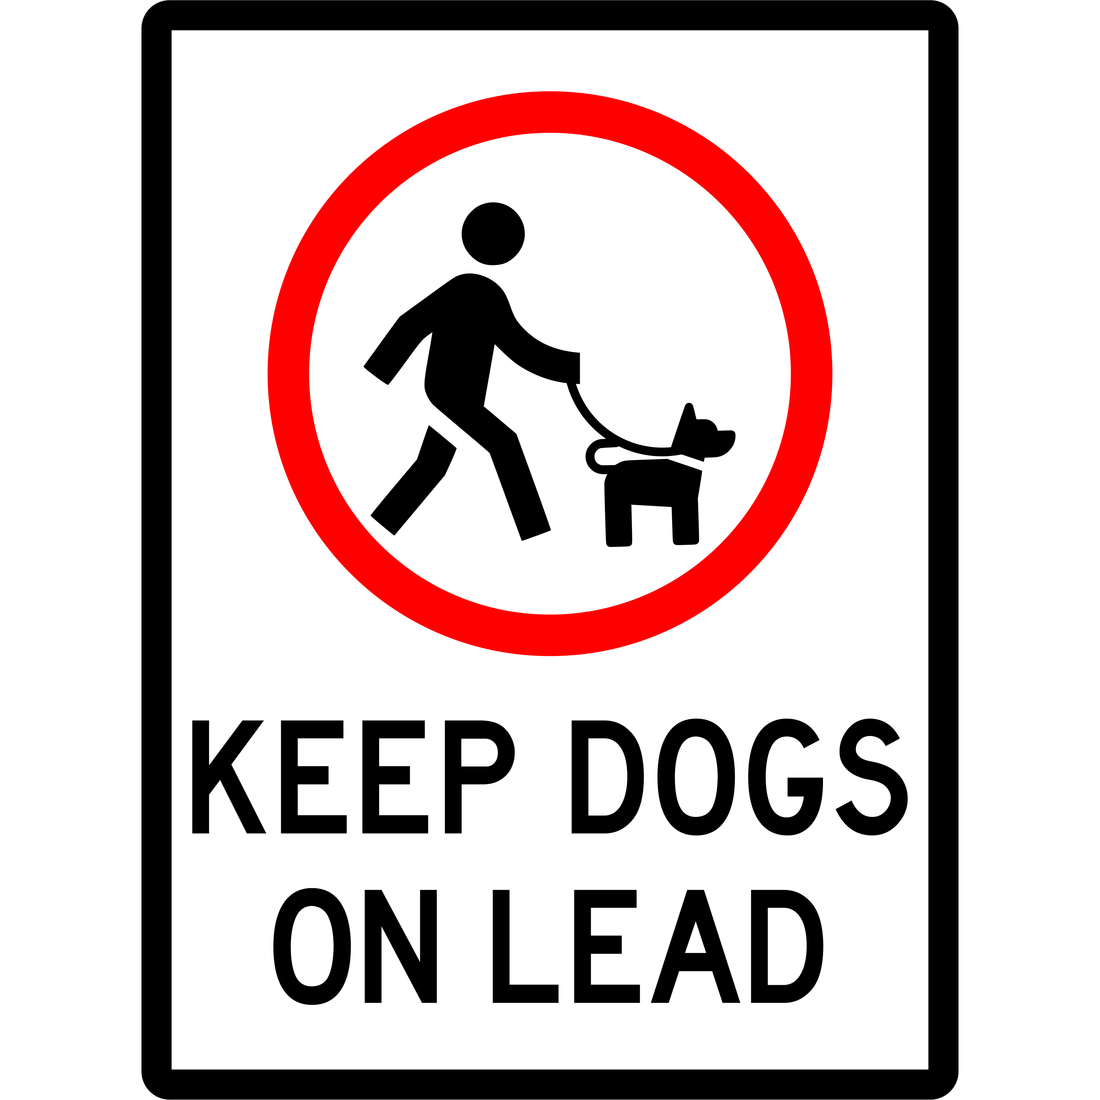 PROHIBITION - KEEP DOGS ON LEAD